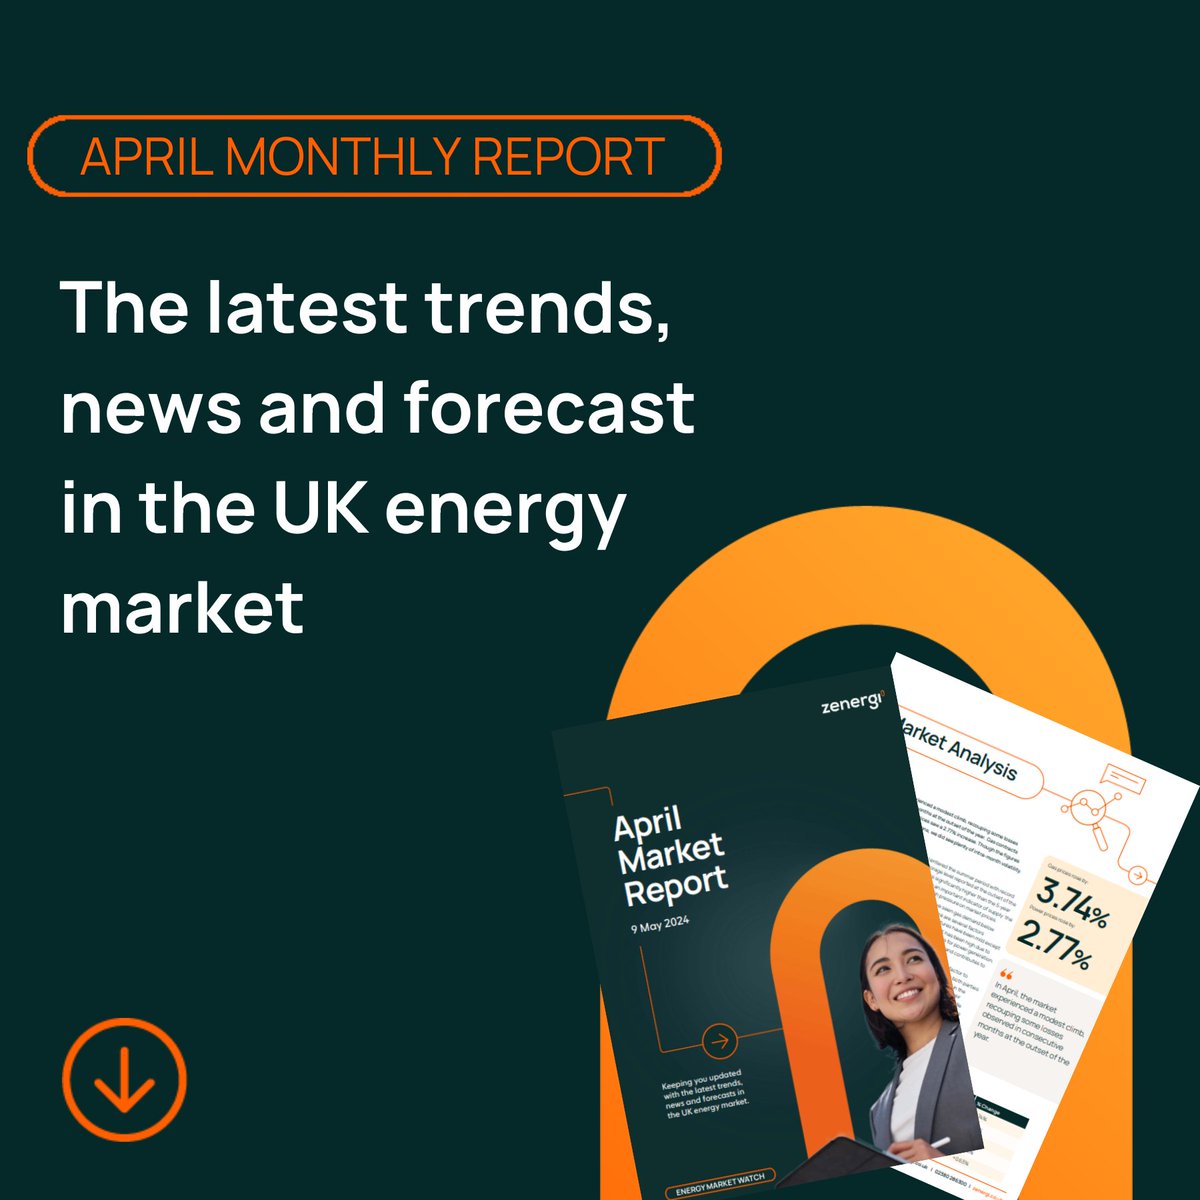 Hear the latest from our market-leading experts on trends and news in the UK energy market throughout April, plus forecasts for the month ahead👇 Are you looking to keep on top of the markets & secure the best rates? Download our April Market Report👉 bit.ly/3QymiZF